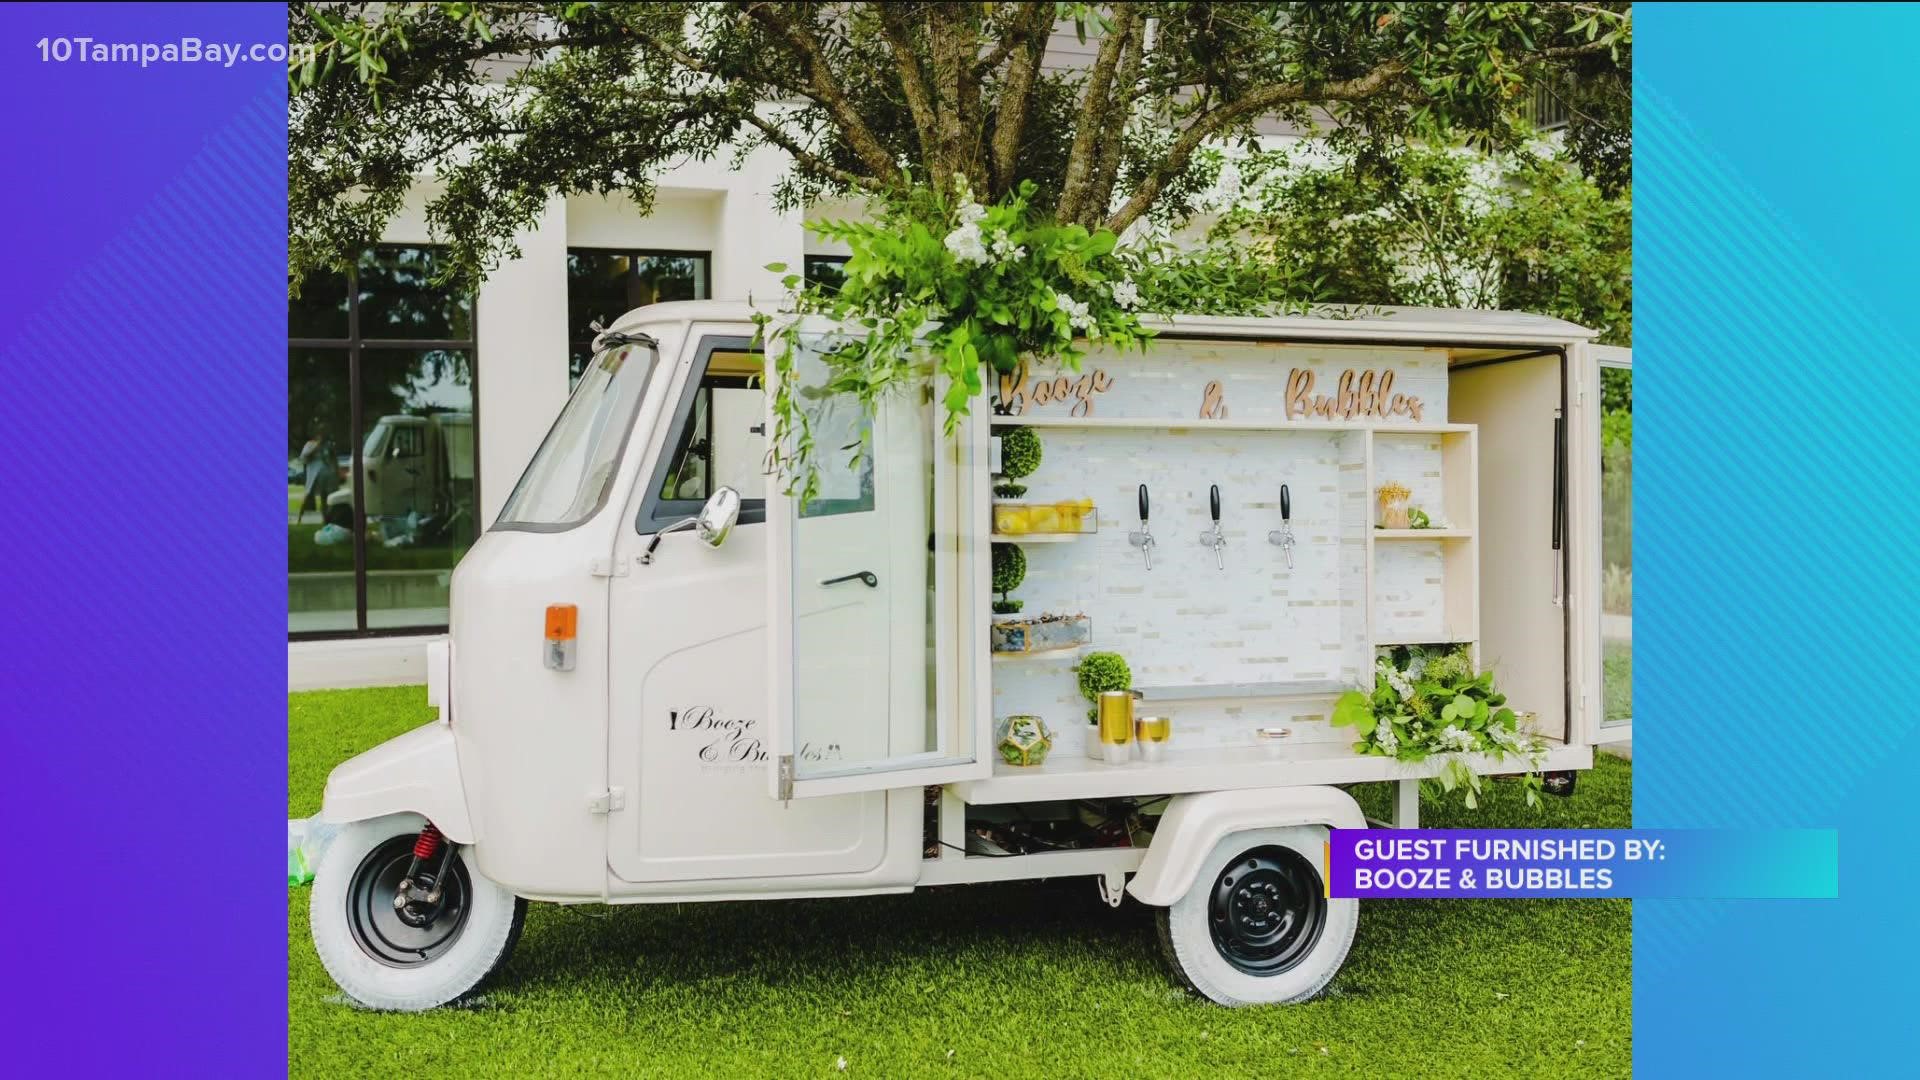 This is not your average business on wheels. Booze & Bubbles joined us with more on this mobile tap truck!